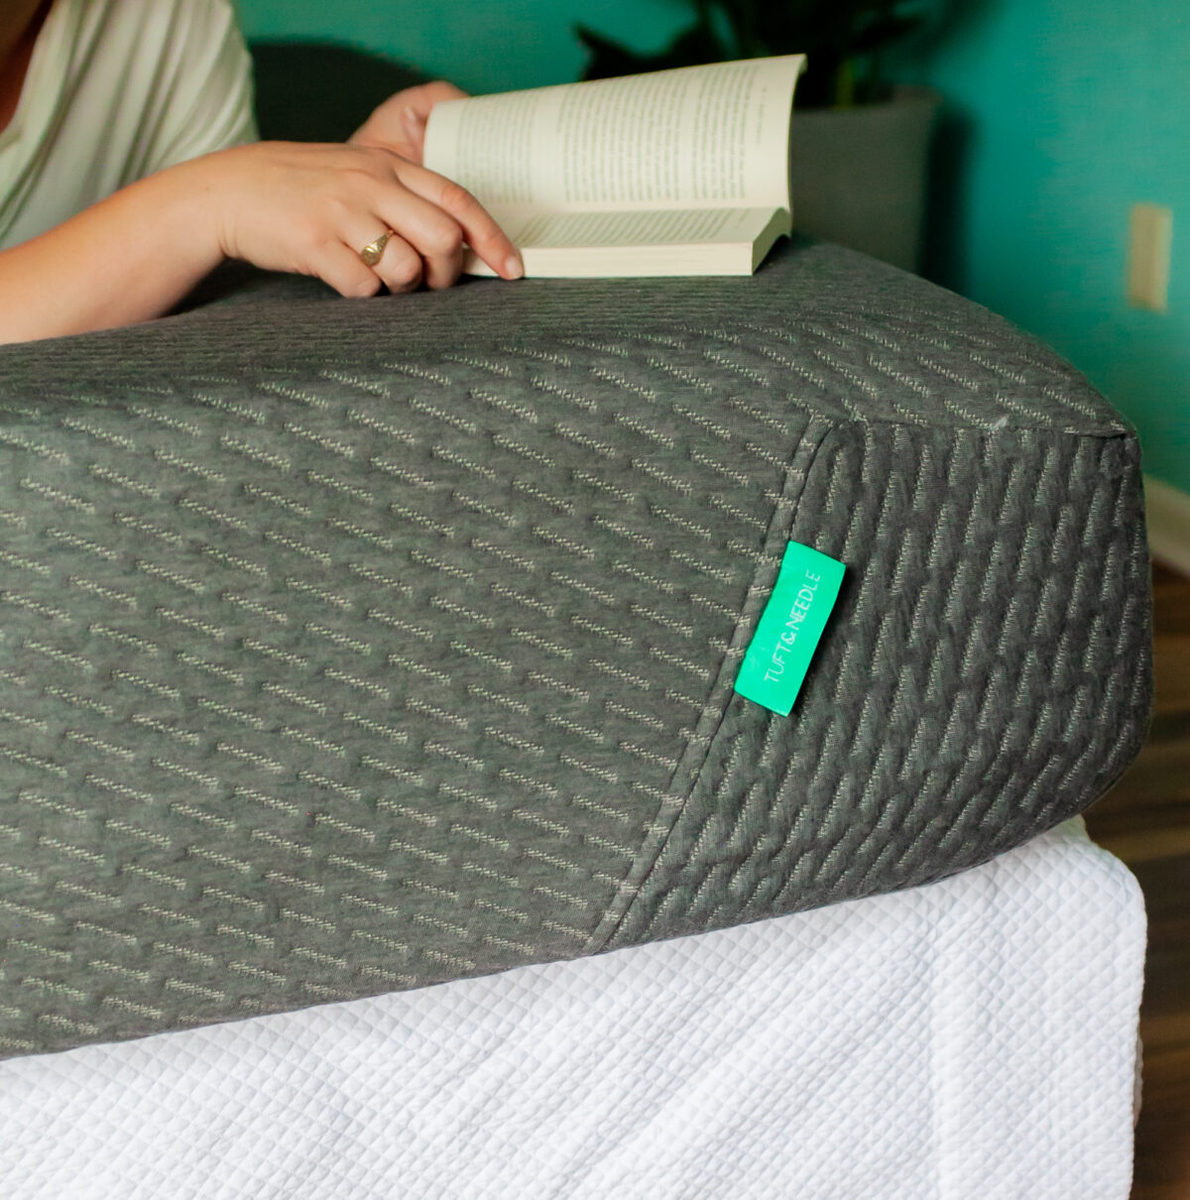 Get A Good Night’S Sleep: Create A Sacred Sleeping Space With The Mint Mattress From Tuft & Needle